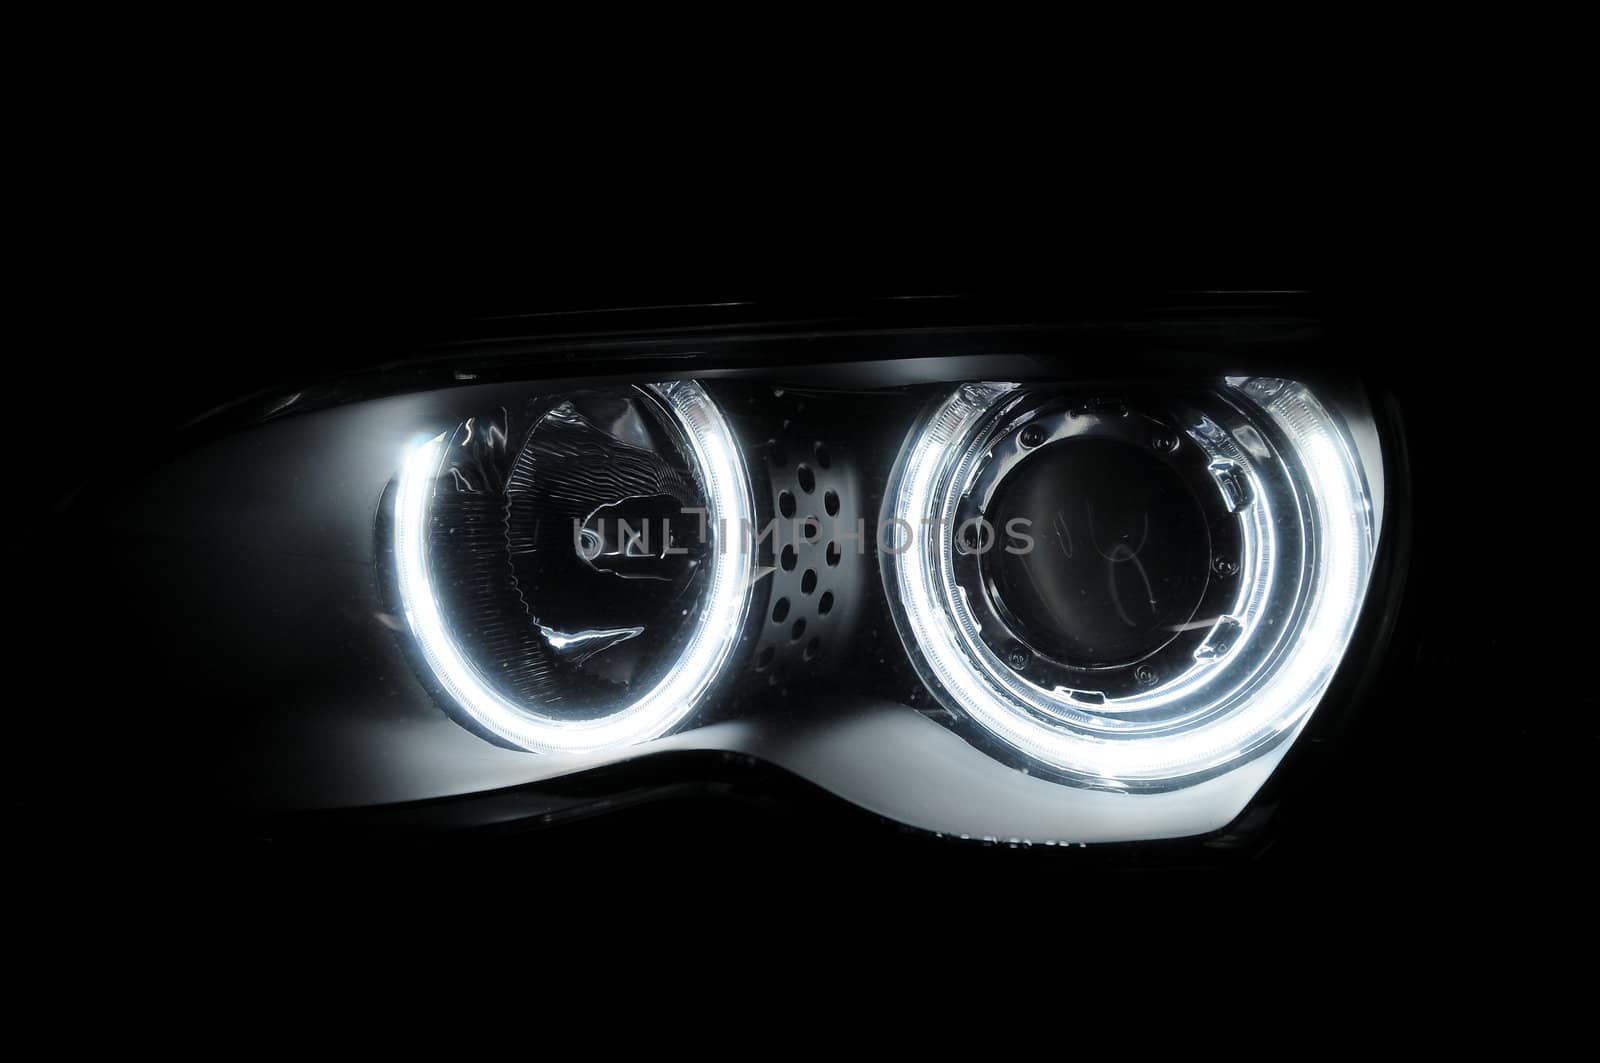 Abstract car circular front lights in darkness by gravityimaging1